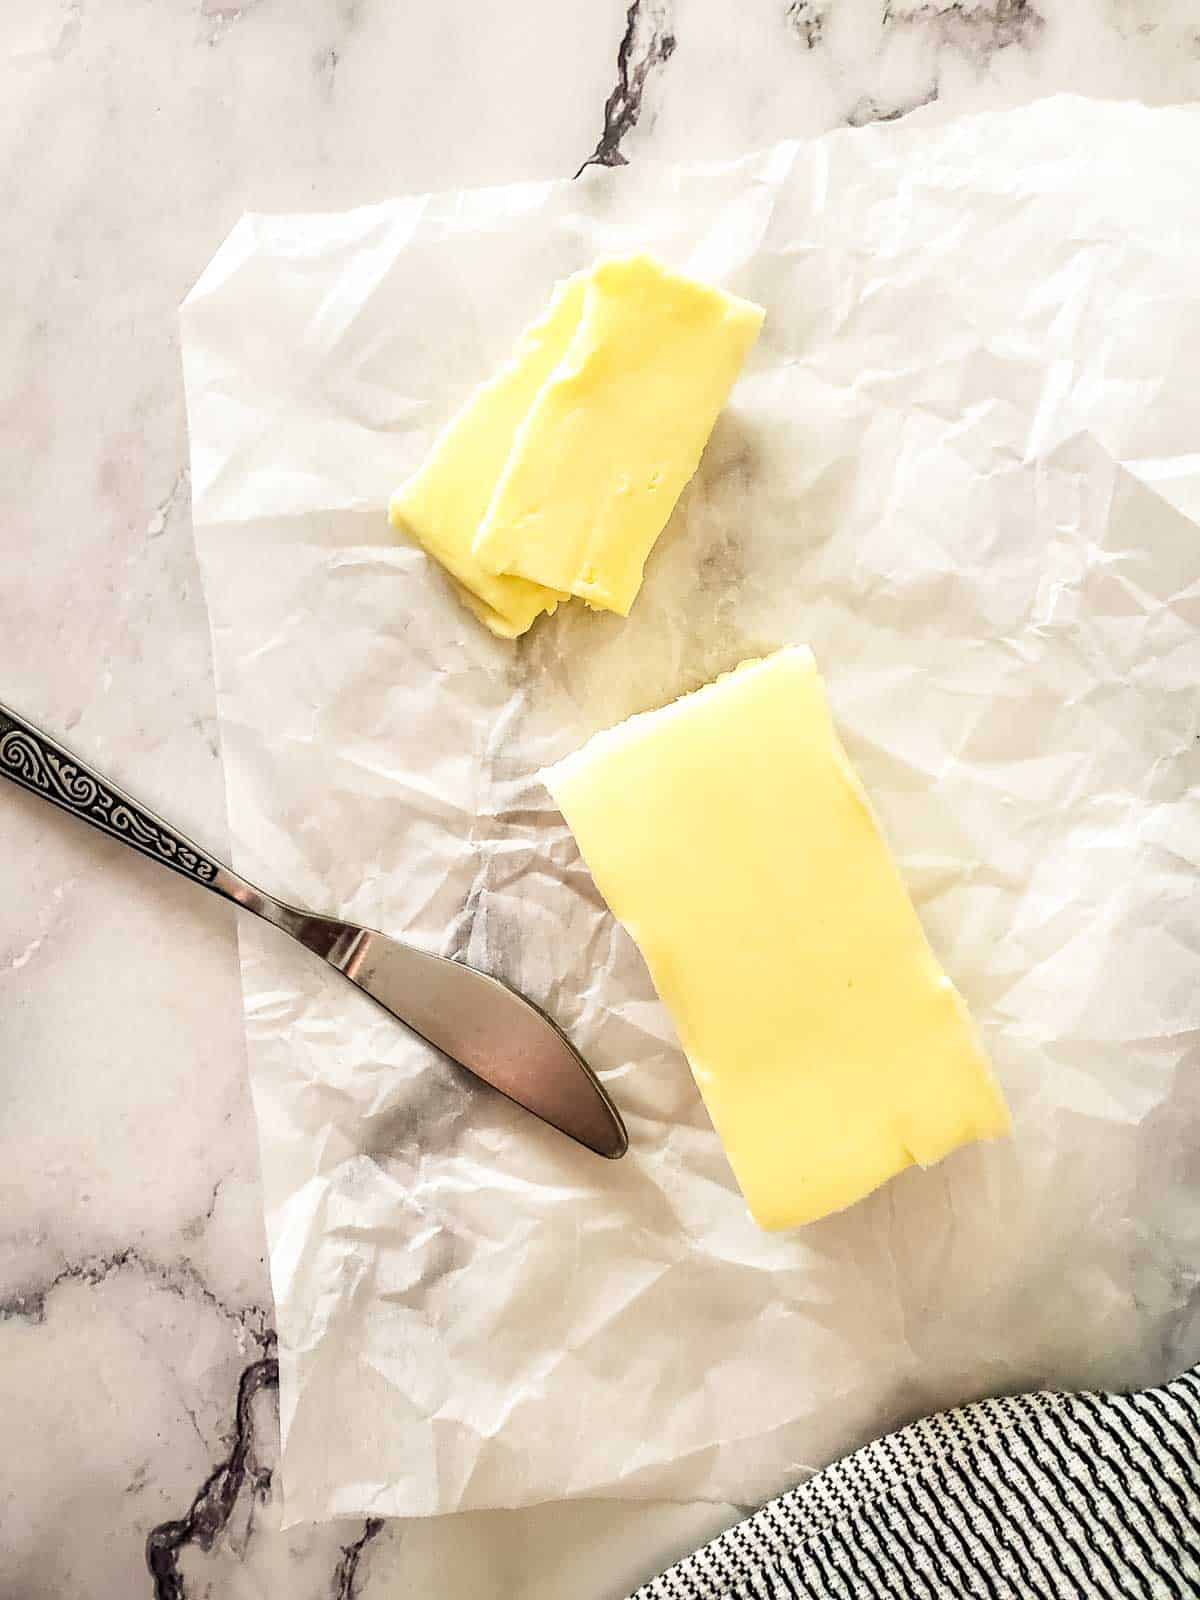 A rectangular block of homemade cultured butter on a crumpled piece of parchment paper next to a silver knife.